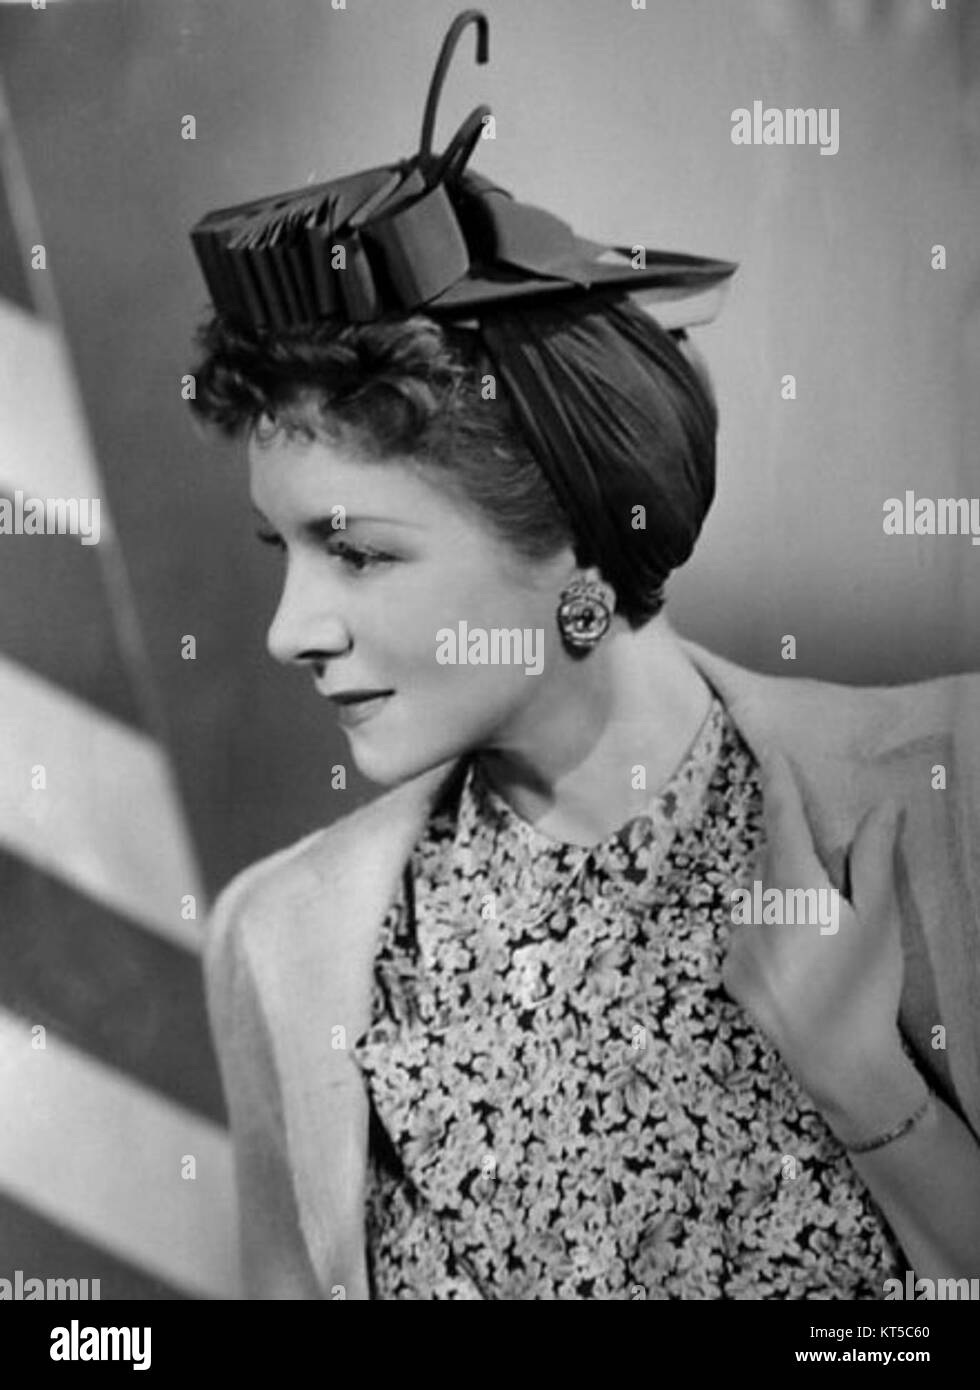 Helen hayes Black and White Stock Photos & Images - Alamy